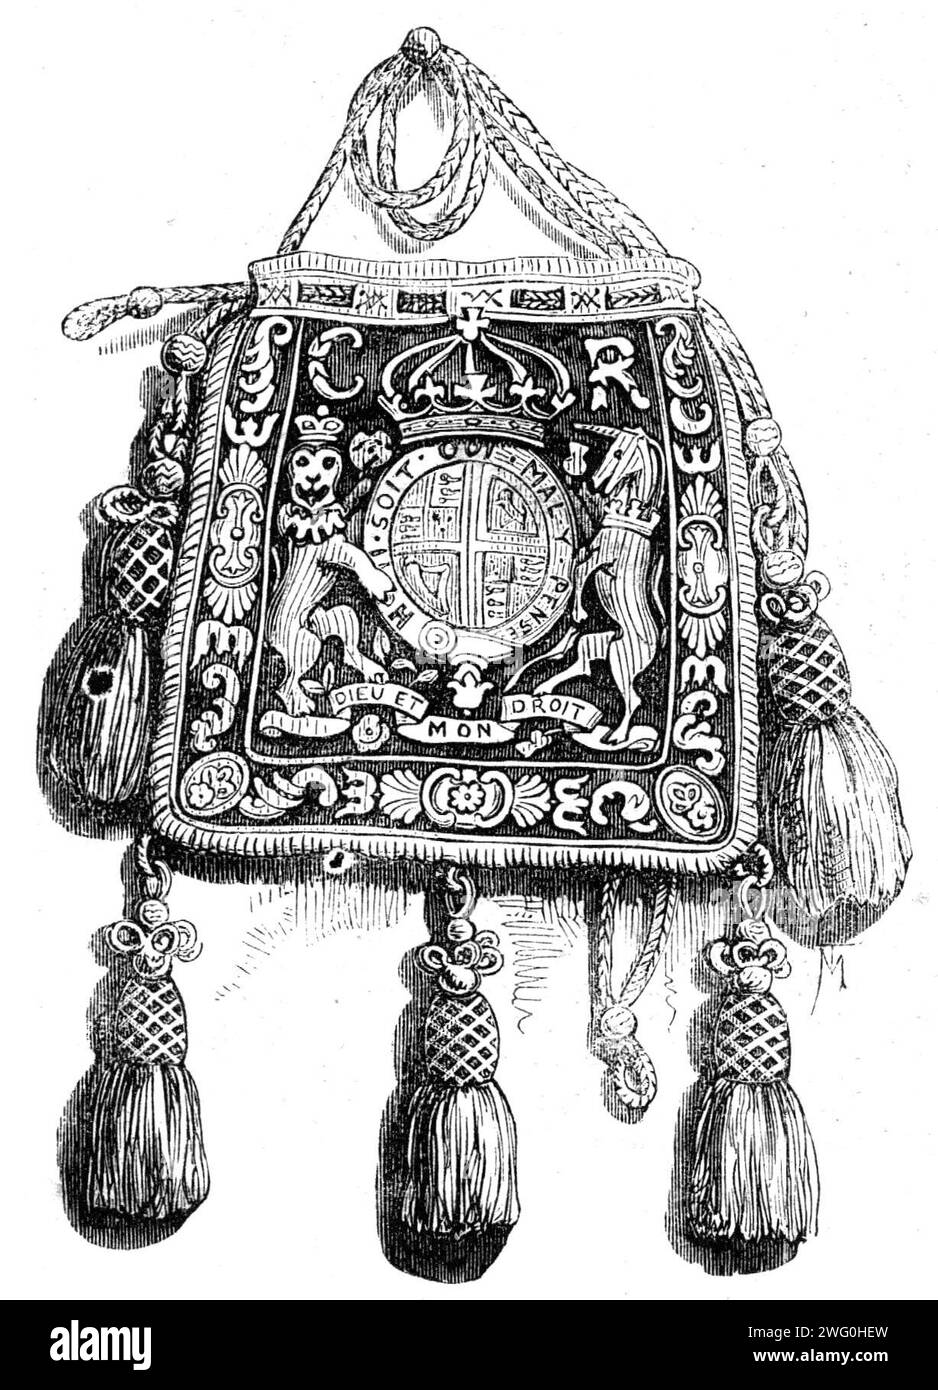 The Privy Purse of Catherine of Braganza, at Sizergh Hall, Westmorland, 1862.  Engraving of '...the badge of office belonging to Sir Thomas Strickland. Keeper of her Privy Purse. It is of crimson velvet, the shape and size of a large reticule, richly embroidered with the Royal arms and the initials &quot;C. R.&quot; in gold and silver twist, and is still loyally preserved among the heirlooms of the Strickland family at Sizergh Hall, in Westmorland'. From &quot;Illustrated London News&quot;, 1862. Stock Photo